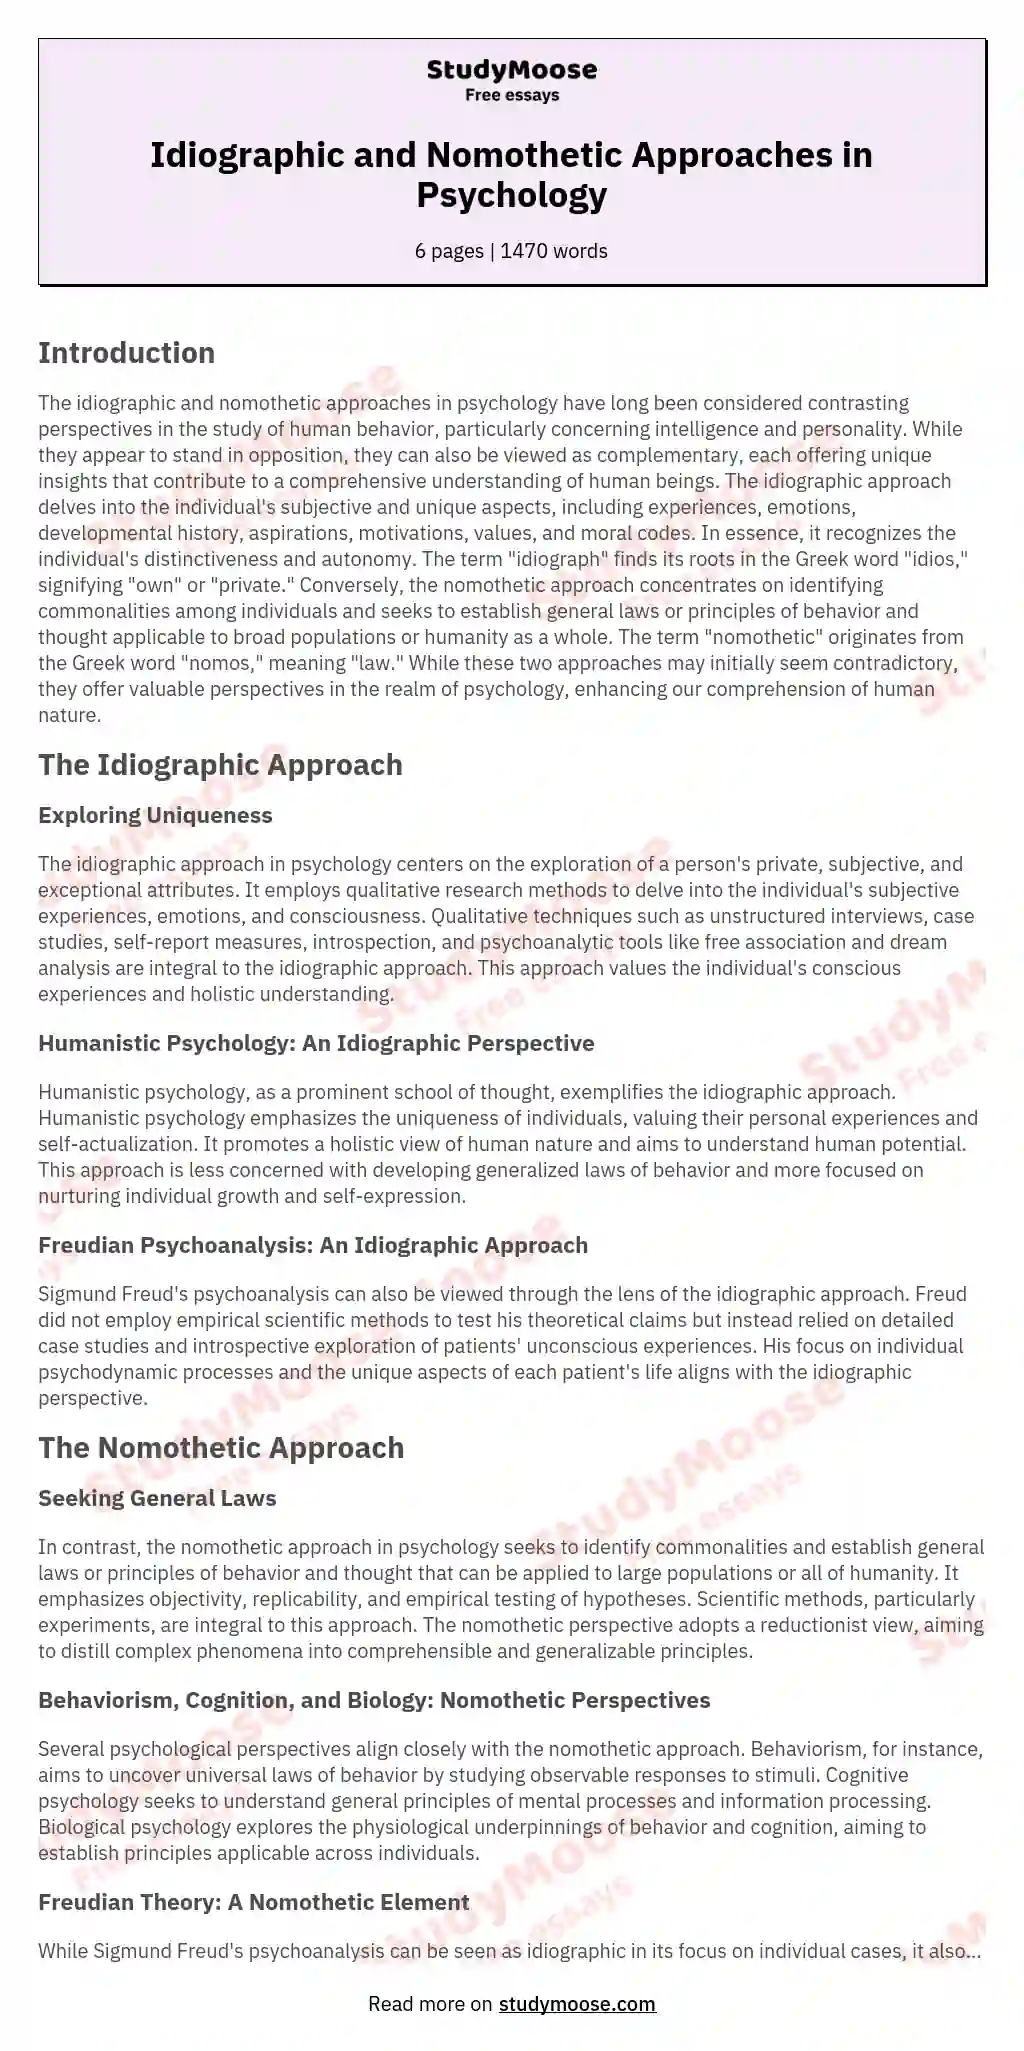 Idiographic and Nomothetic Approaches in Psychology essay